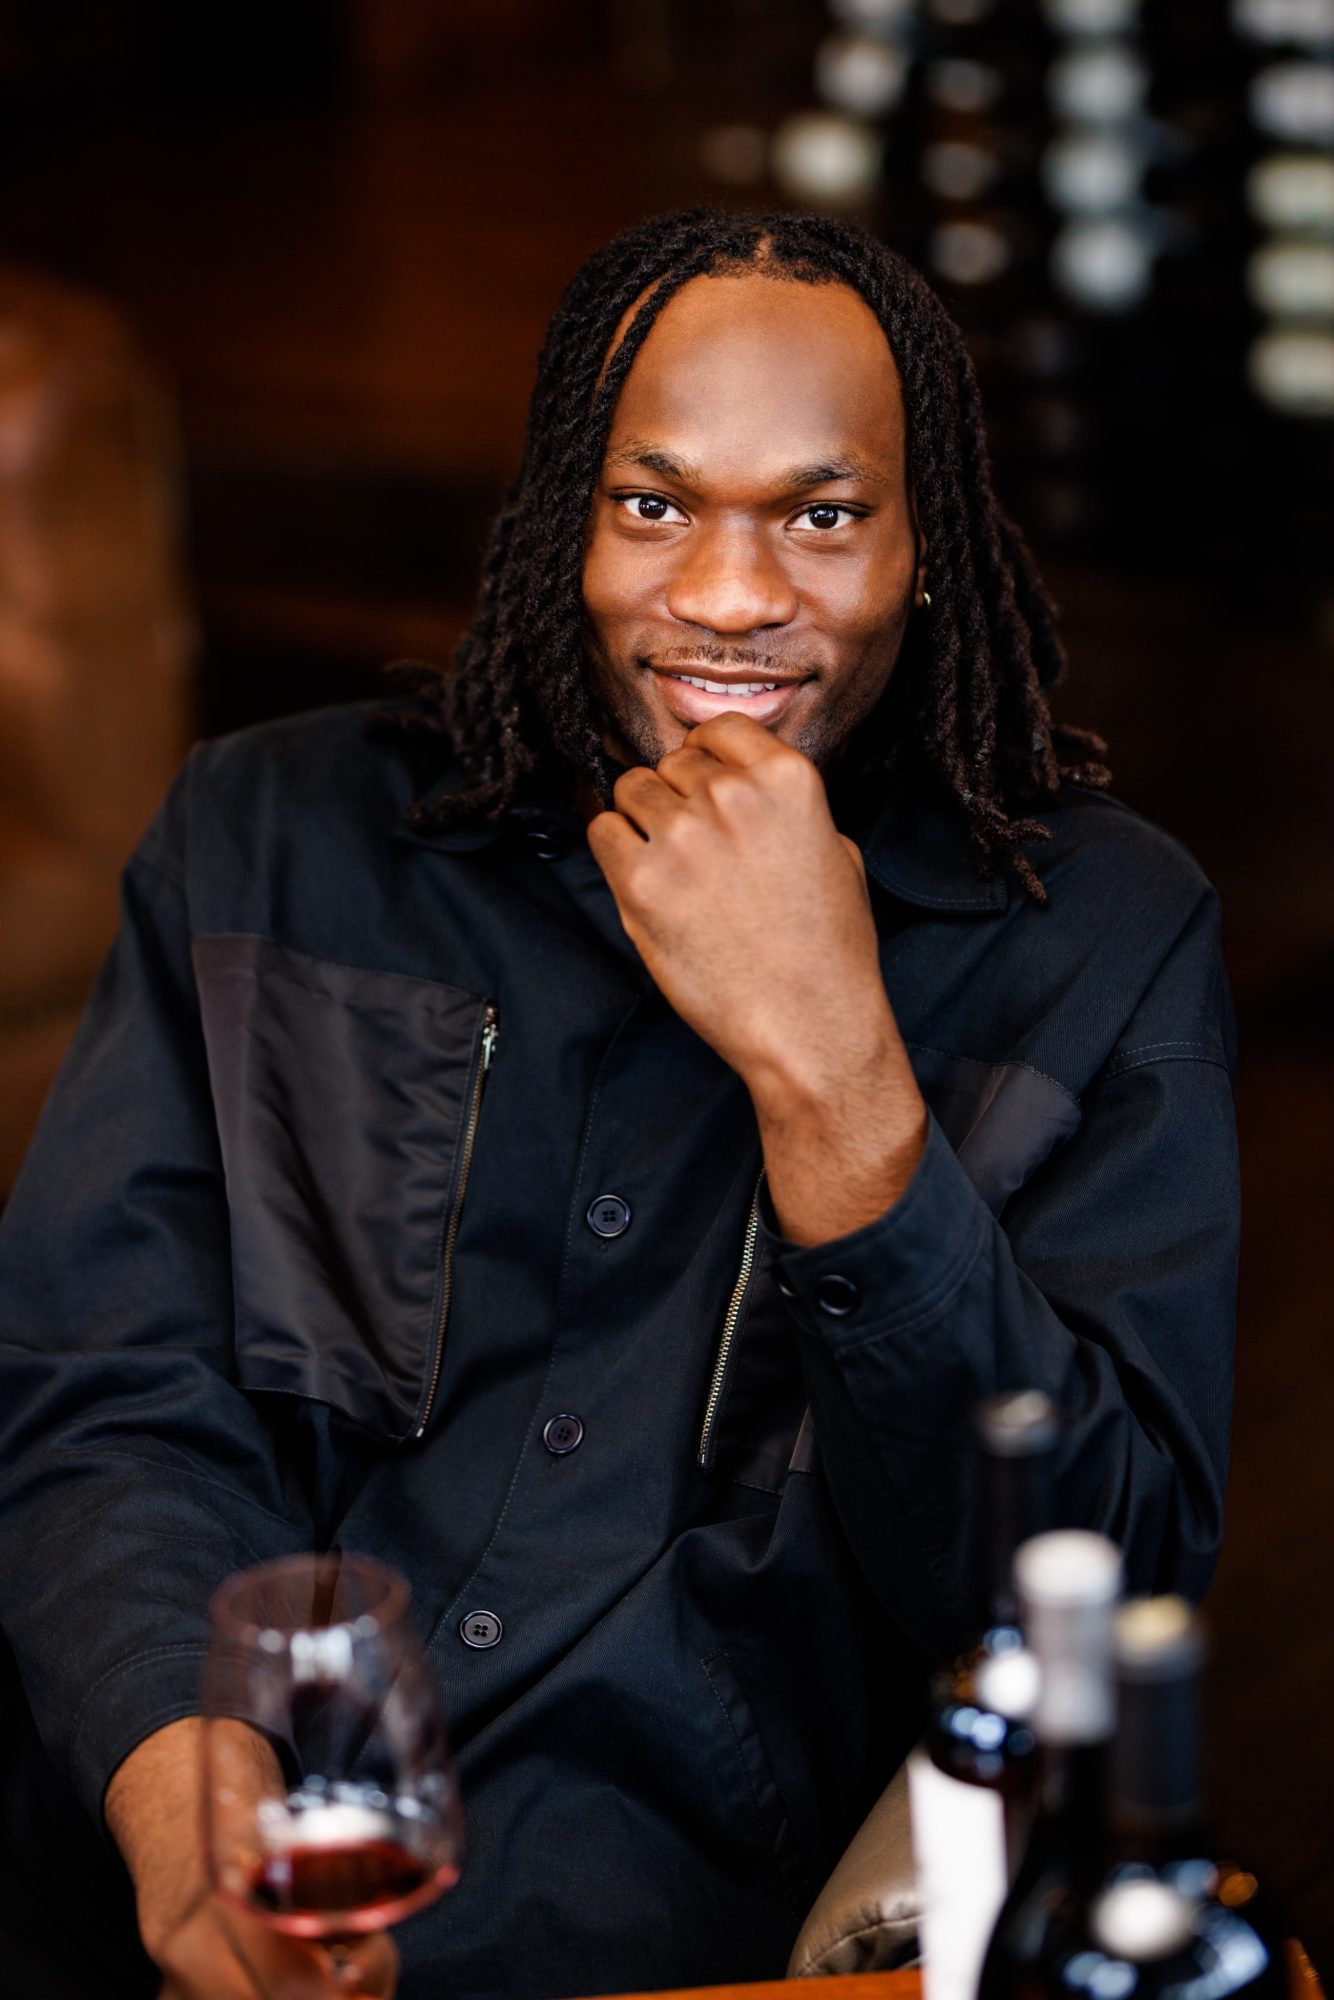 Precious Achiuwa dressed in black with a smirk, resting his chin in his hand while holding a glass of red wine.